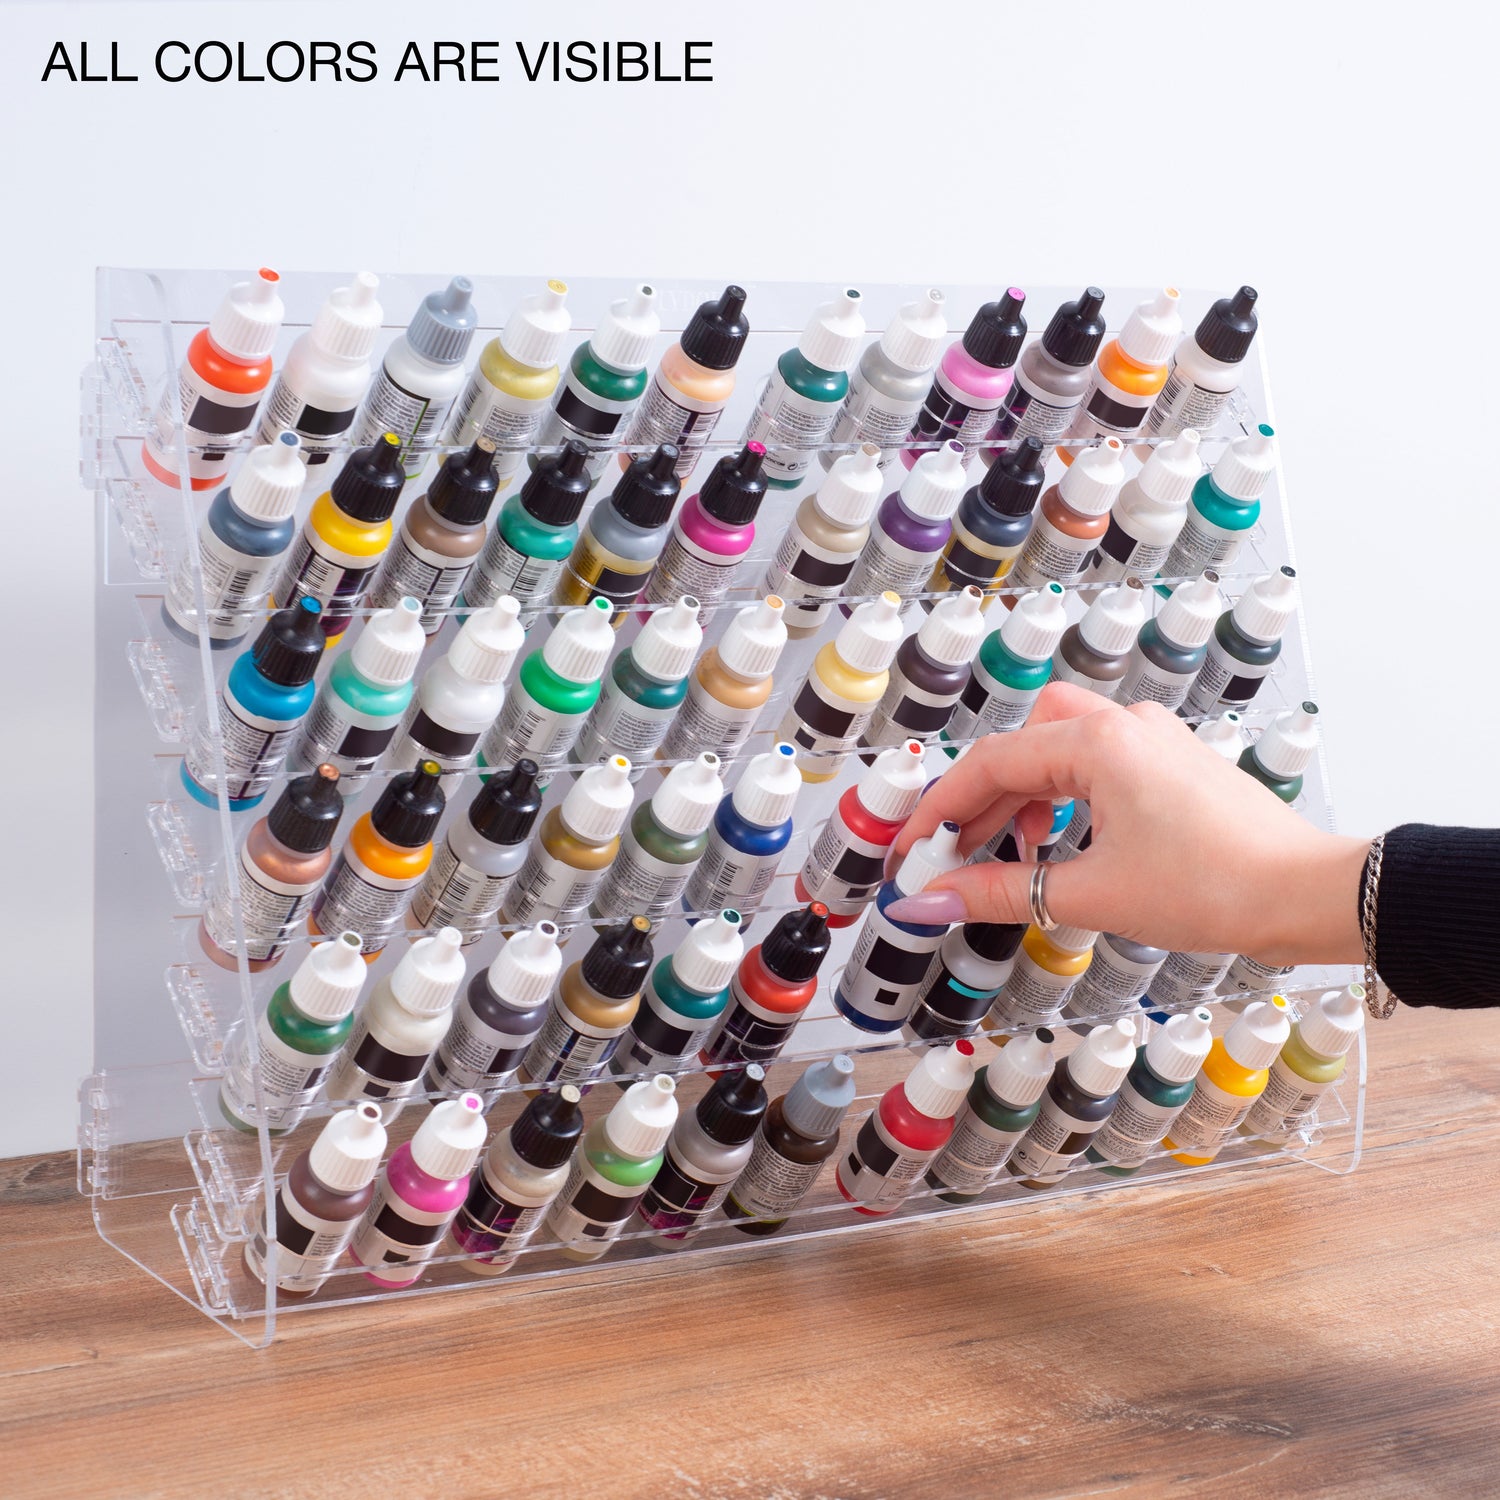 Plydolex Acrylic Paint Storage Organizer with 72 Holes for Vallejo Pai